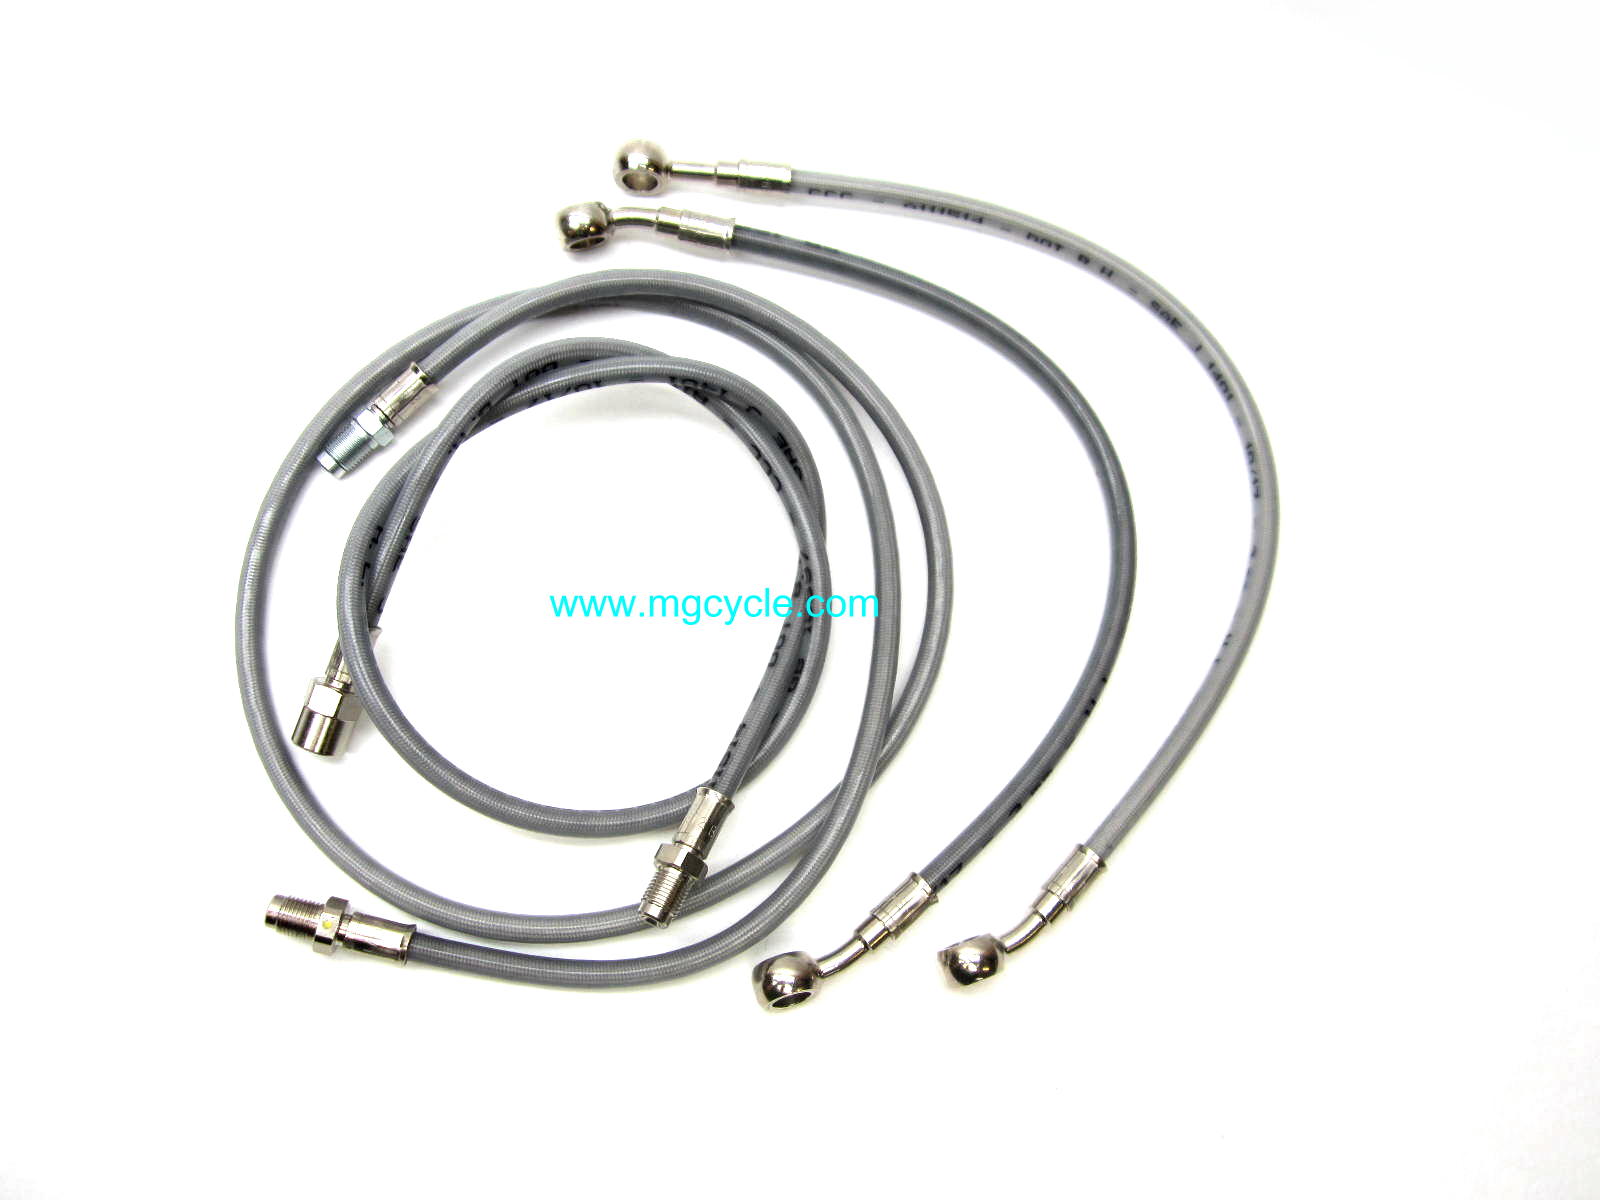 Stainless brake line kit for California III - Click Image to Close